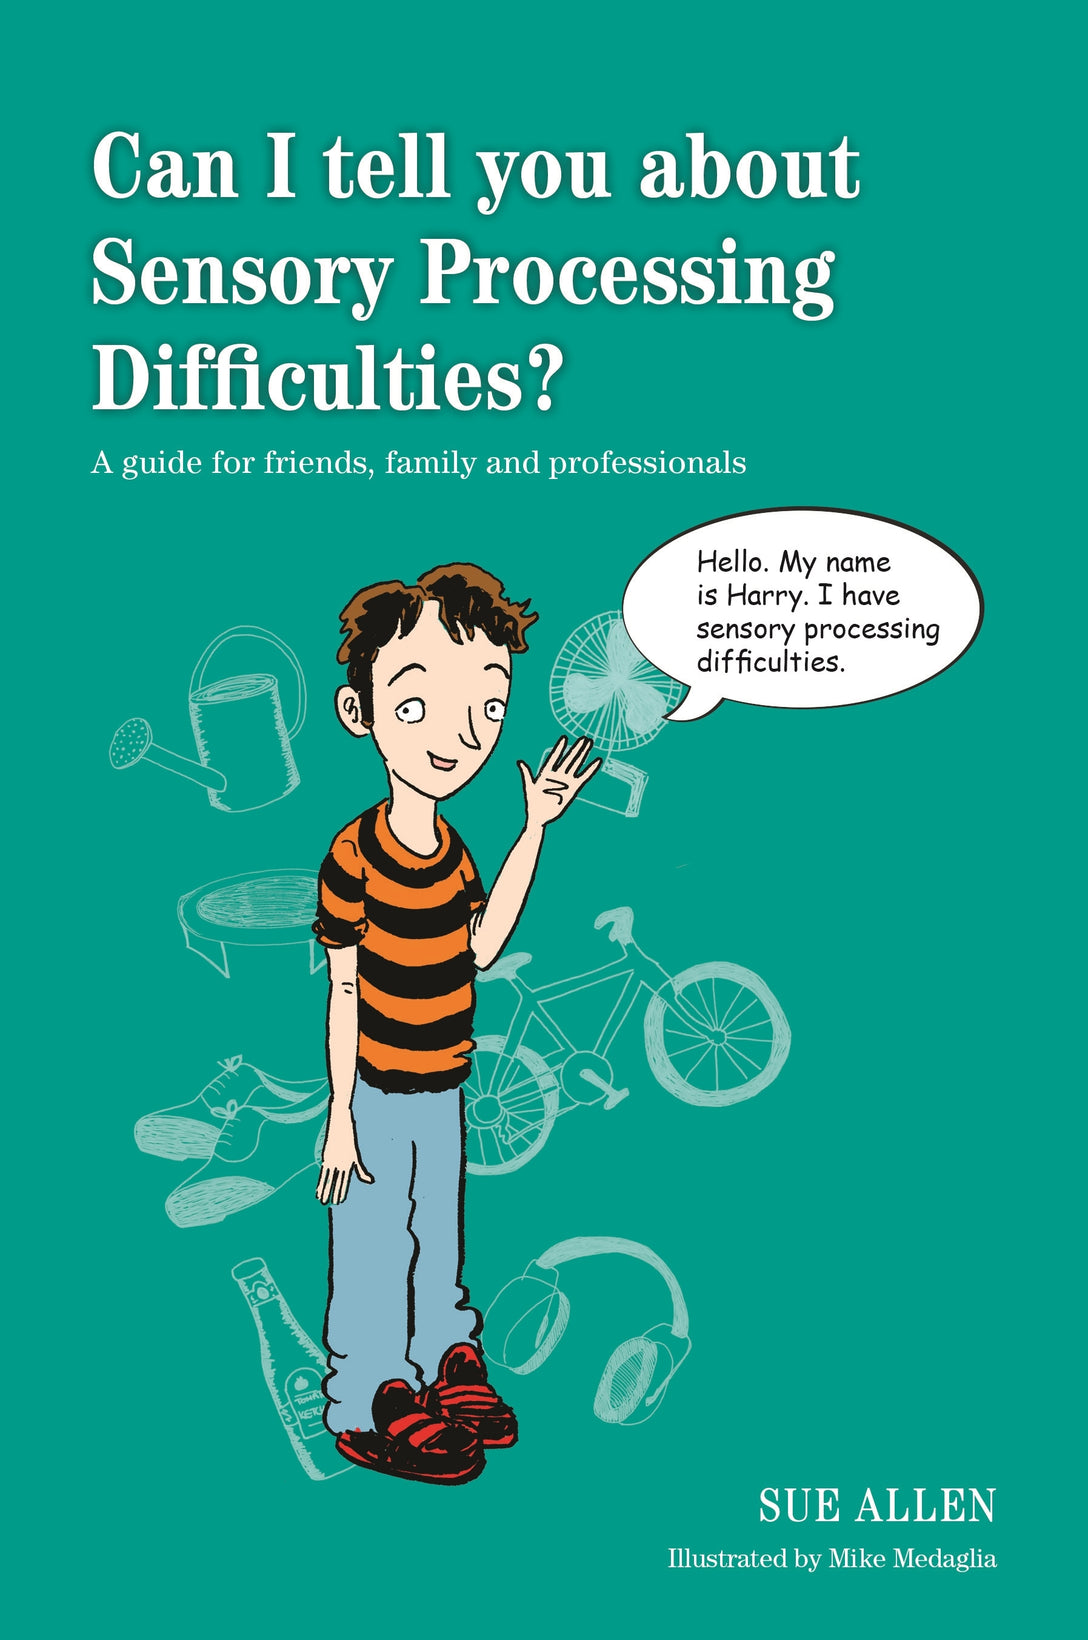 Can I tell you about Sensory Processing Difficulties? by Mike Medaglia, Sue Allen